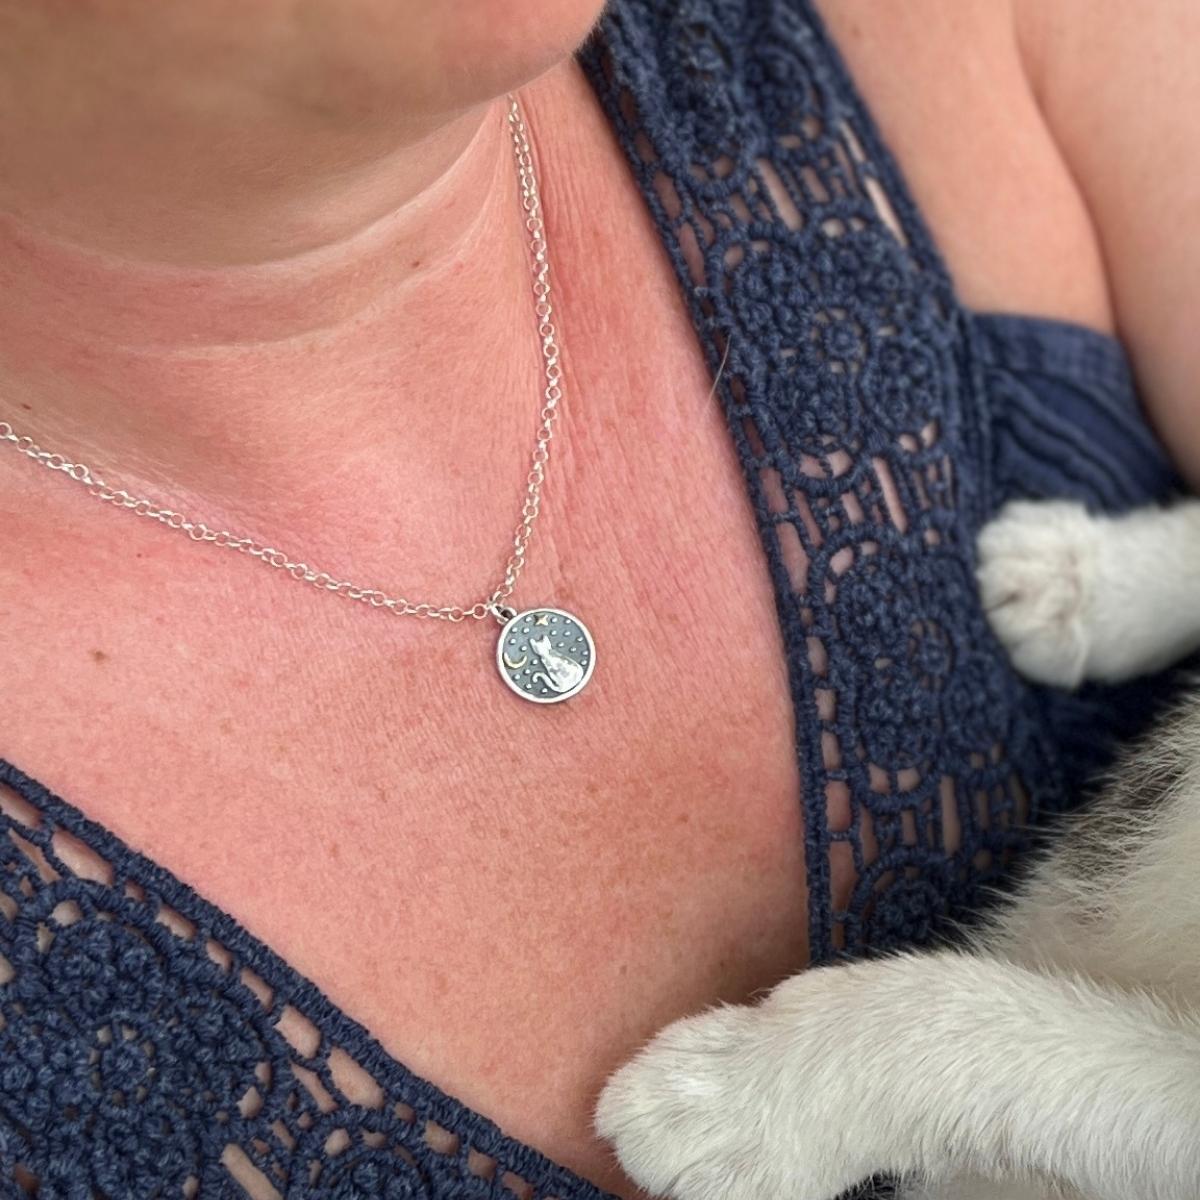 Purrfect Love Necklace: Reflecting Unconditional Cat Affection